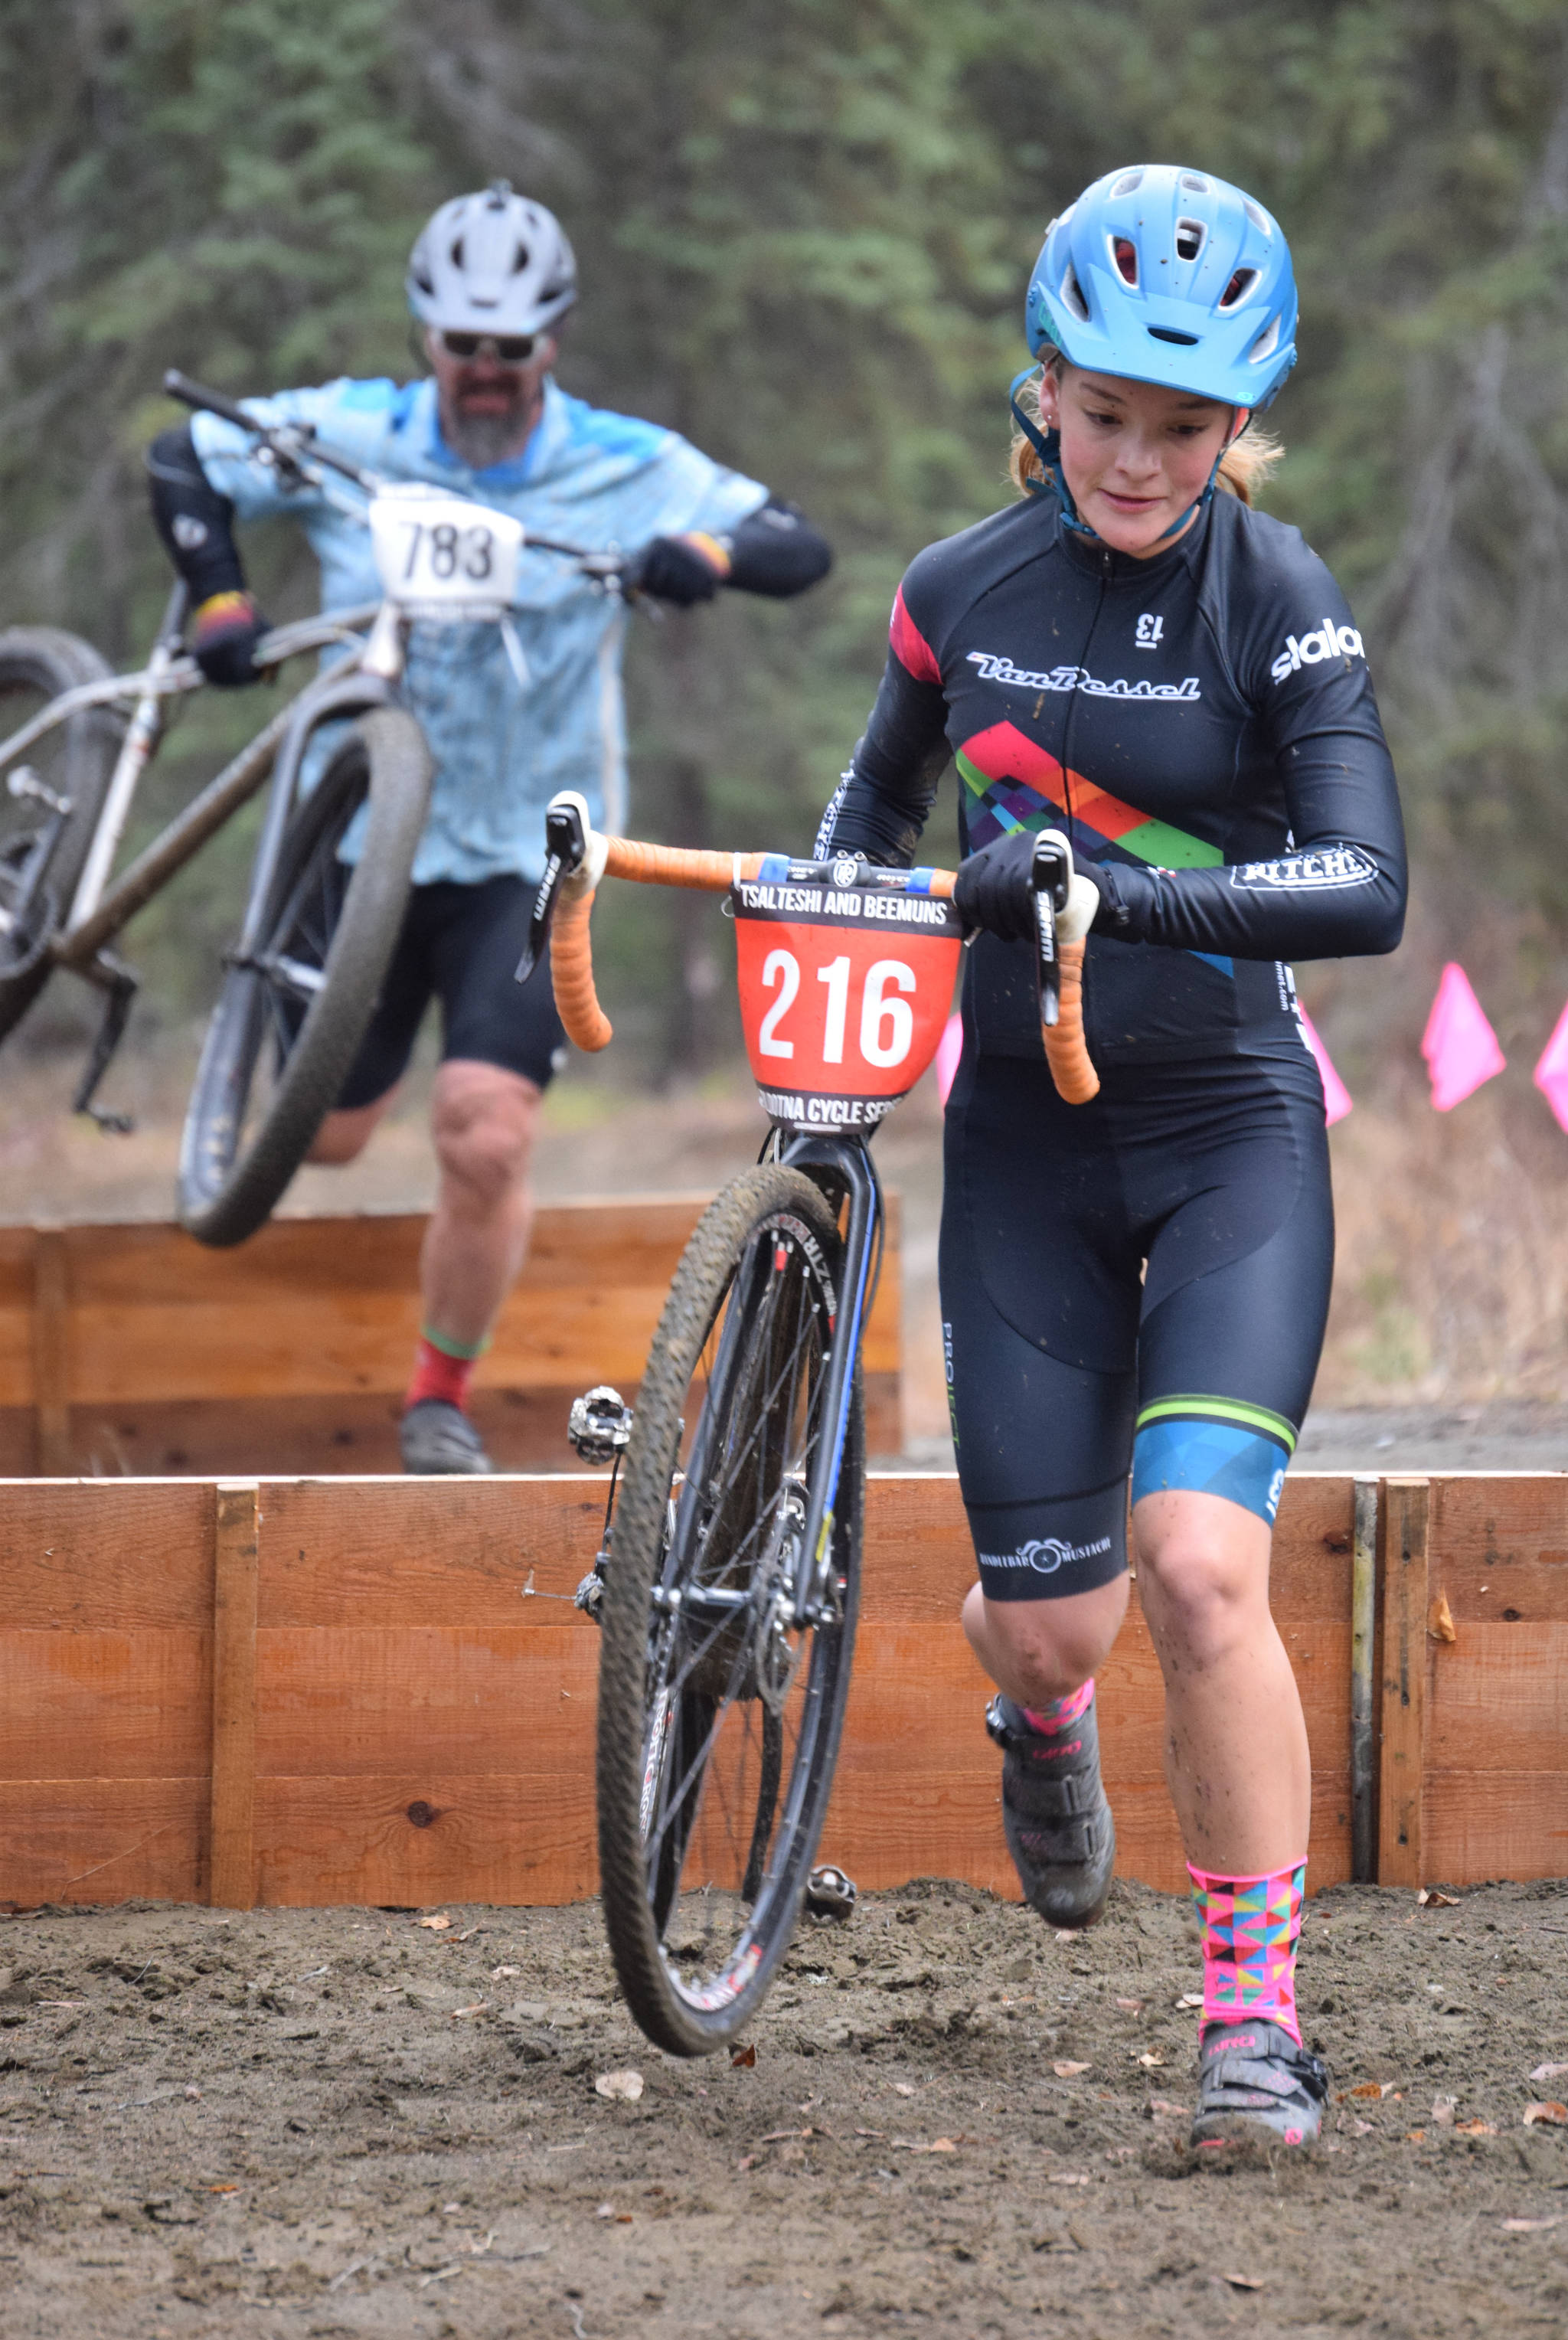 Kalima Glascott leads her father, Bob Glascott, over barriers at the Alaska Cyclocross State Championships on Saturday, Oct. 19, 2019, at Tsalteshi Trails near Soldotna, Alaska. The Glascotts are both from Anchorage. Kalima won the girls under-18 state title. (Photo by Jeff Helminiak/Peninsula Clarion)